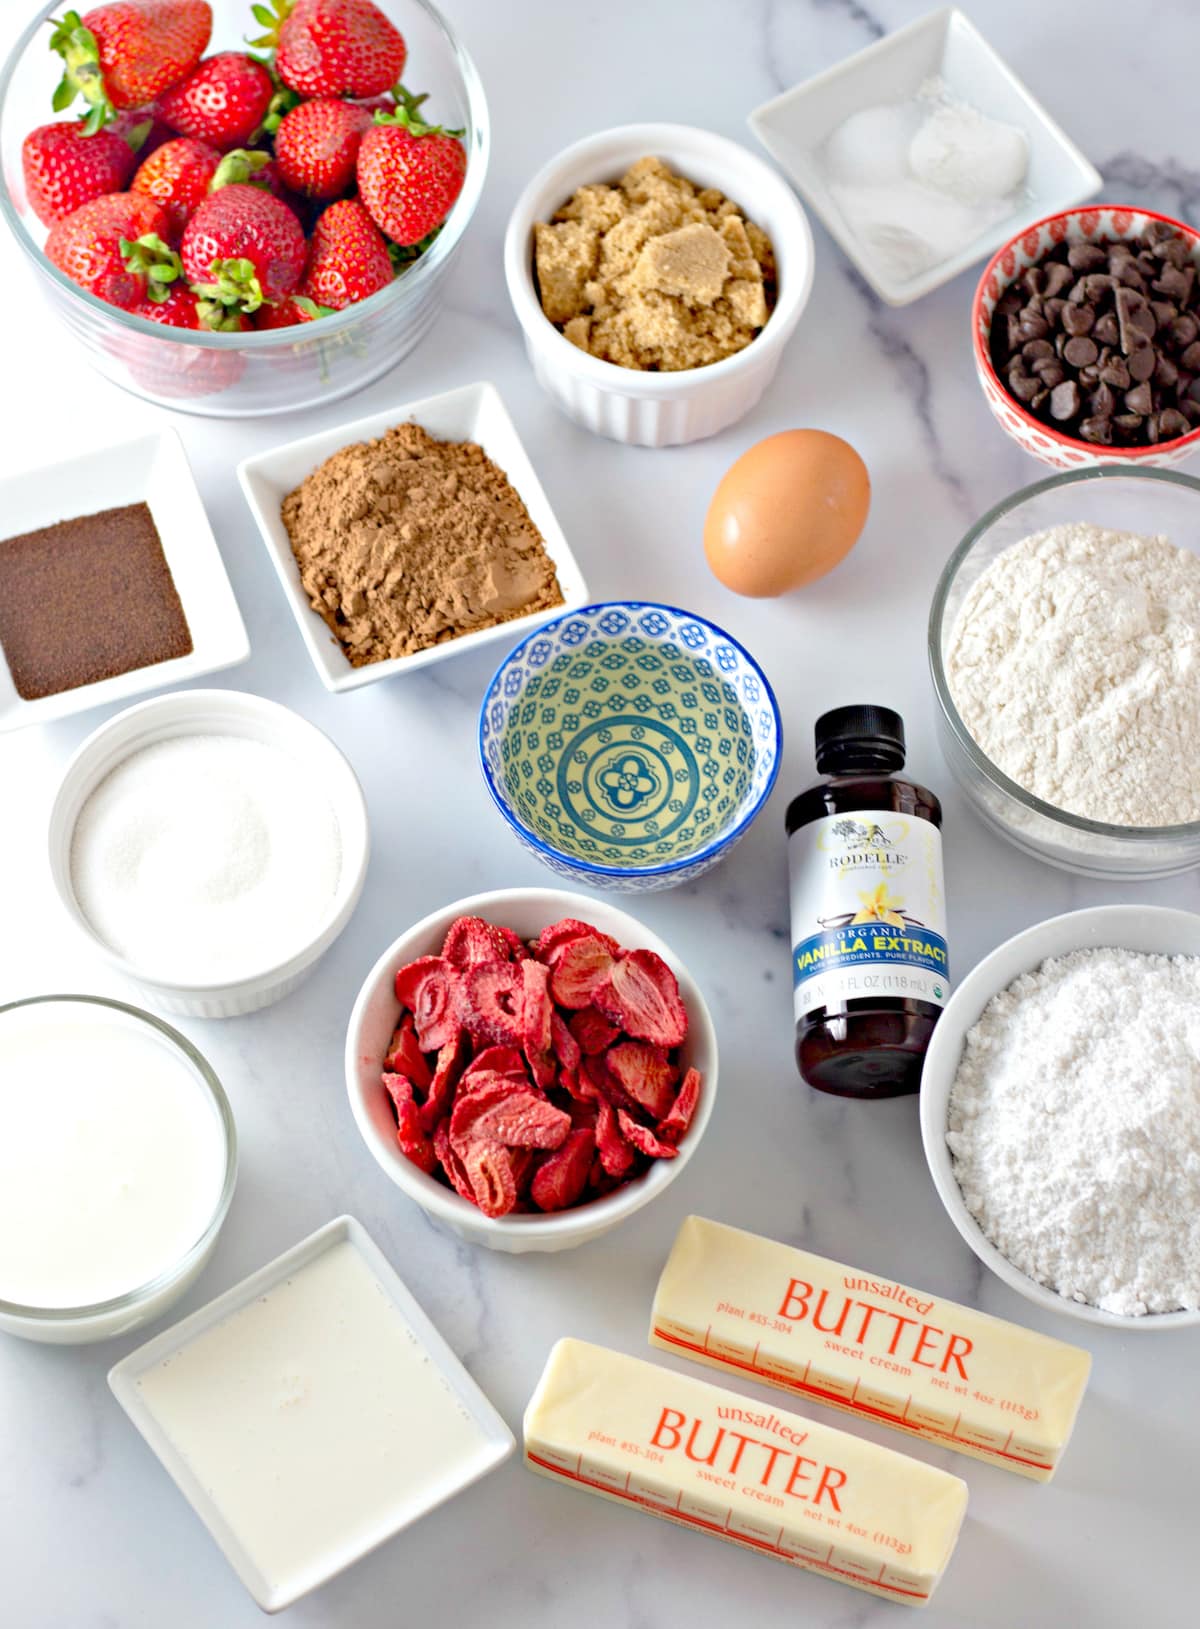 Overhead view of ingredients needed for Chocolate Covered Strawberry Cupcakes